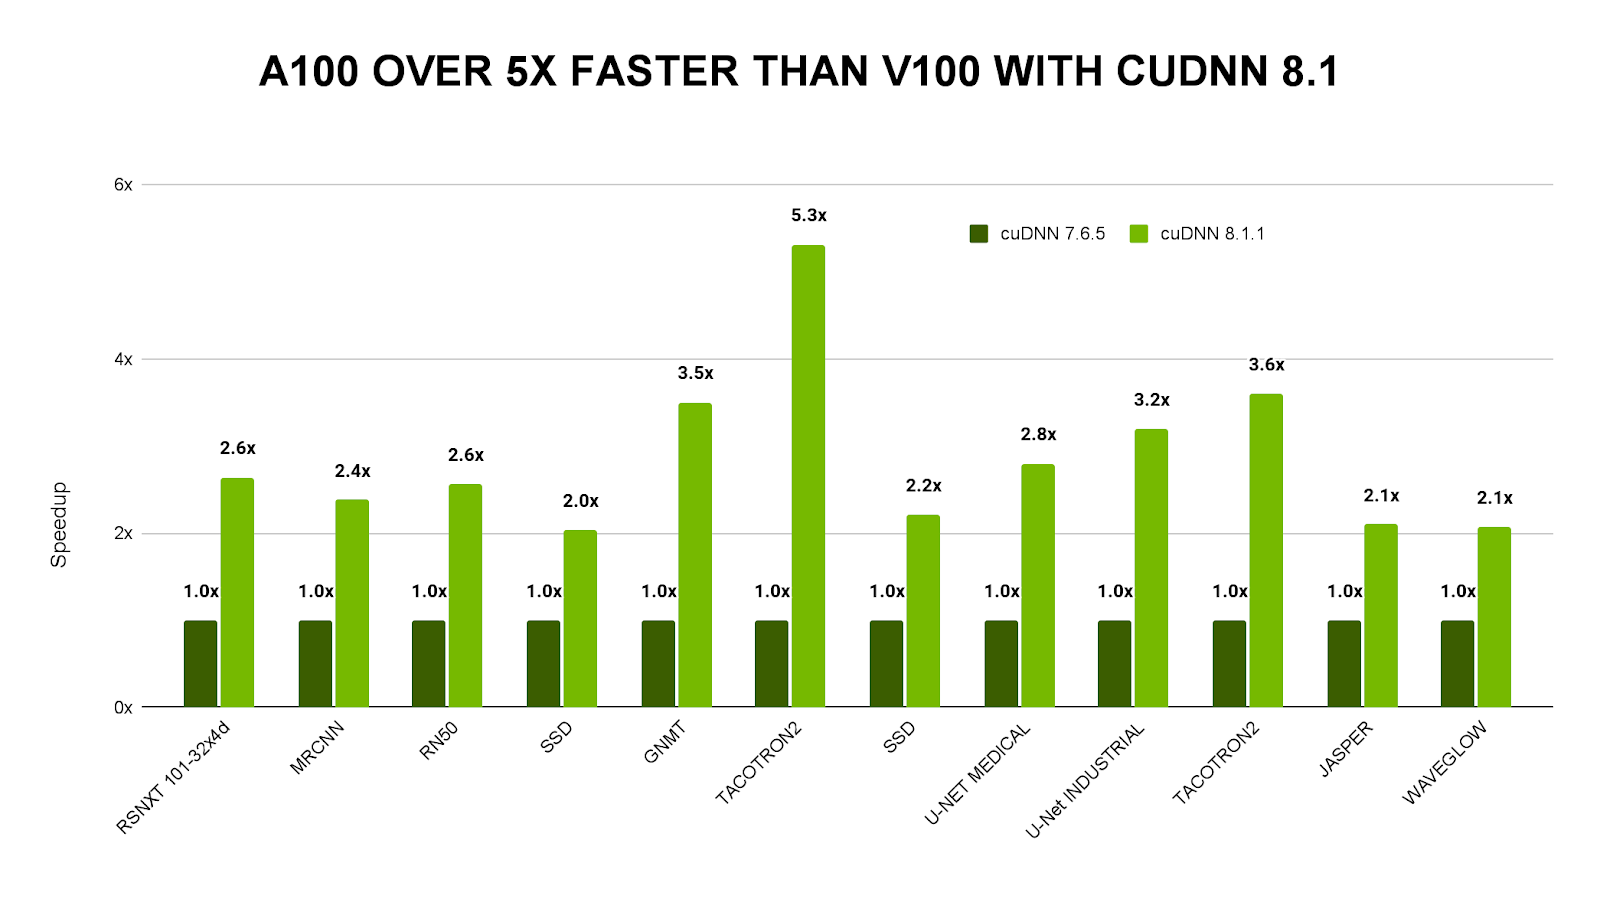 Chart showing A100 over 5X faster than V100 with cuDNN 8.1